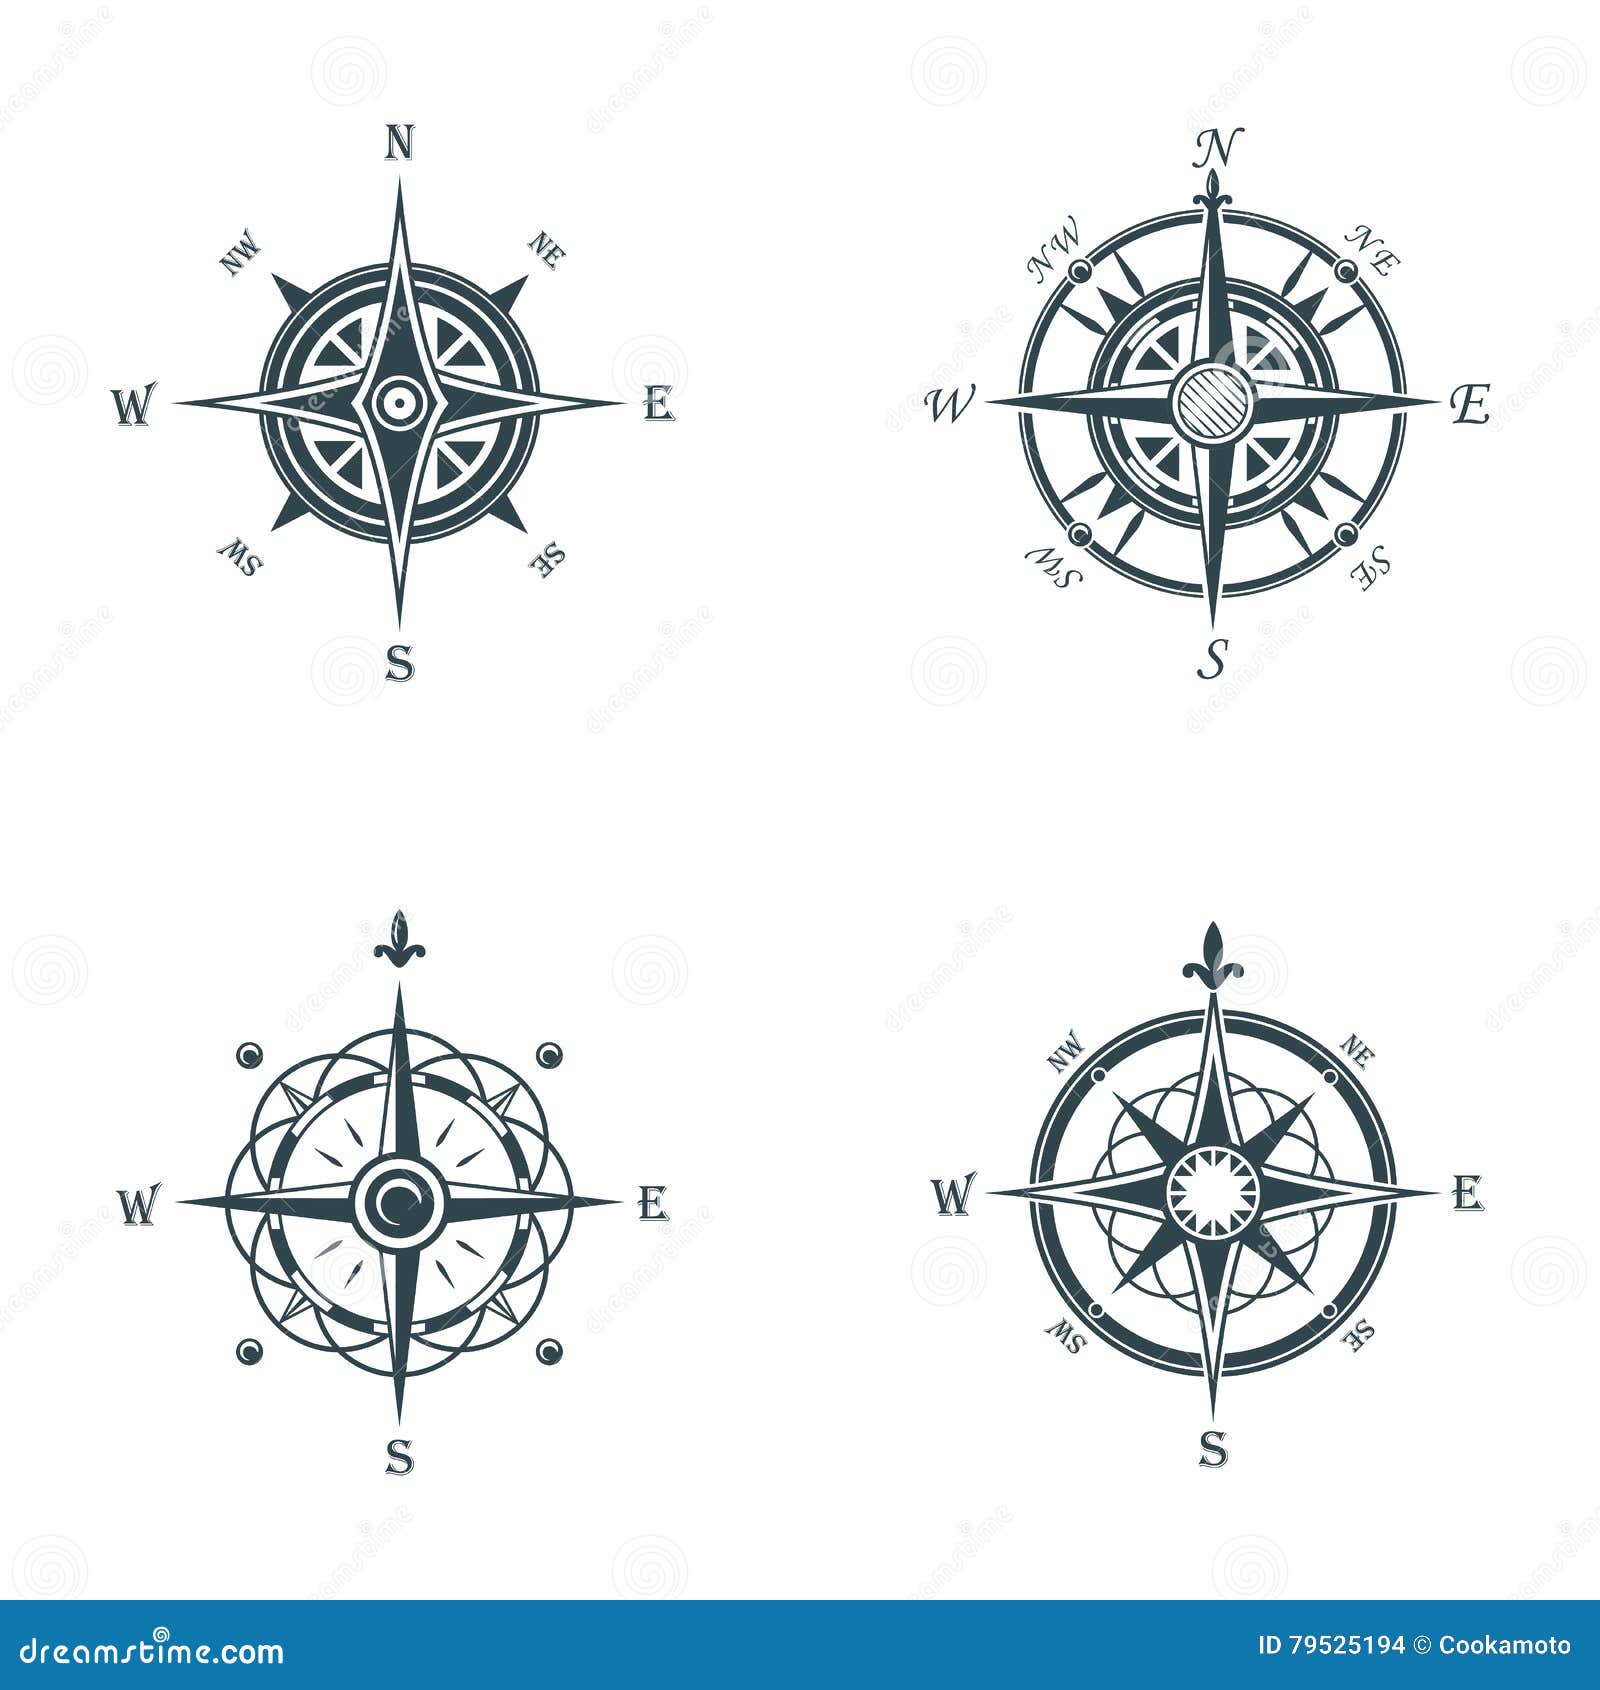 nautical or marine old navigation compass. sea or ocean vintage or retro wind rose for direction or longitude or